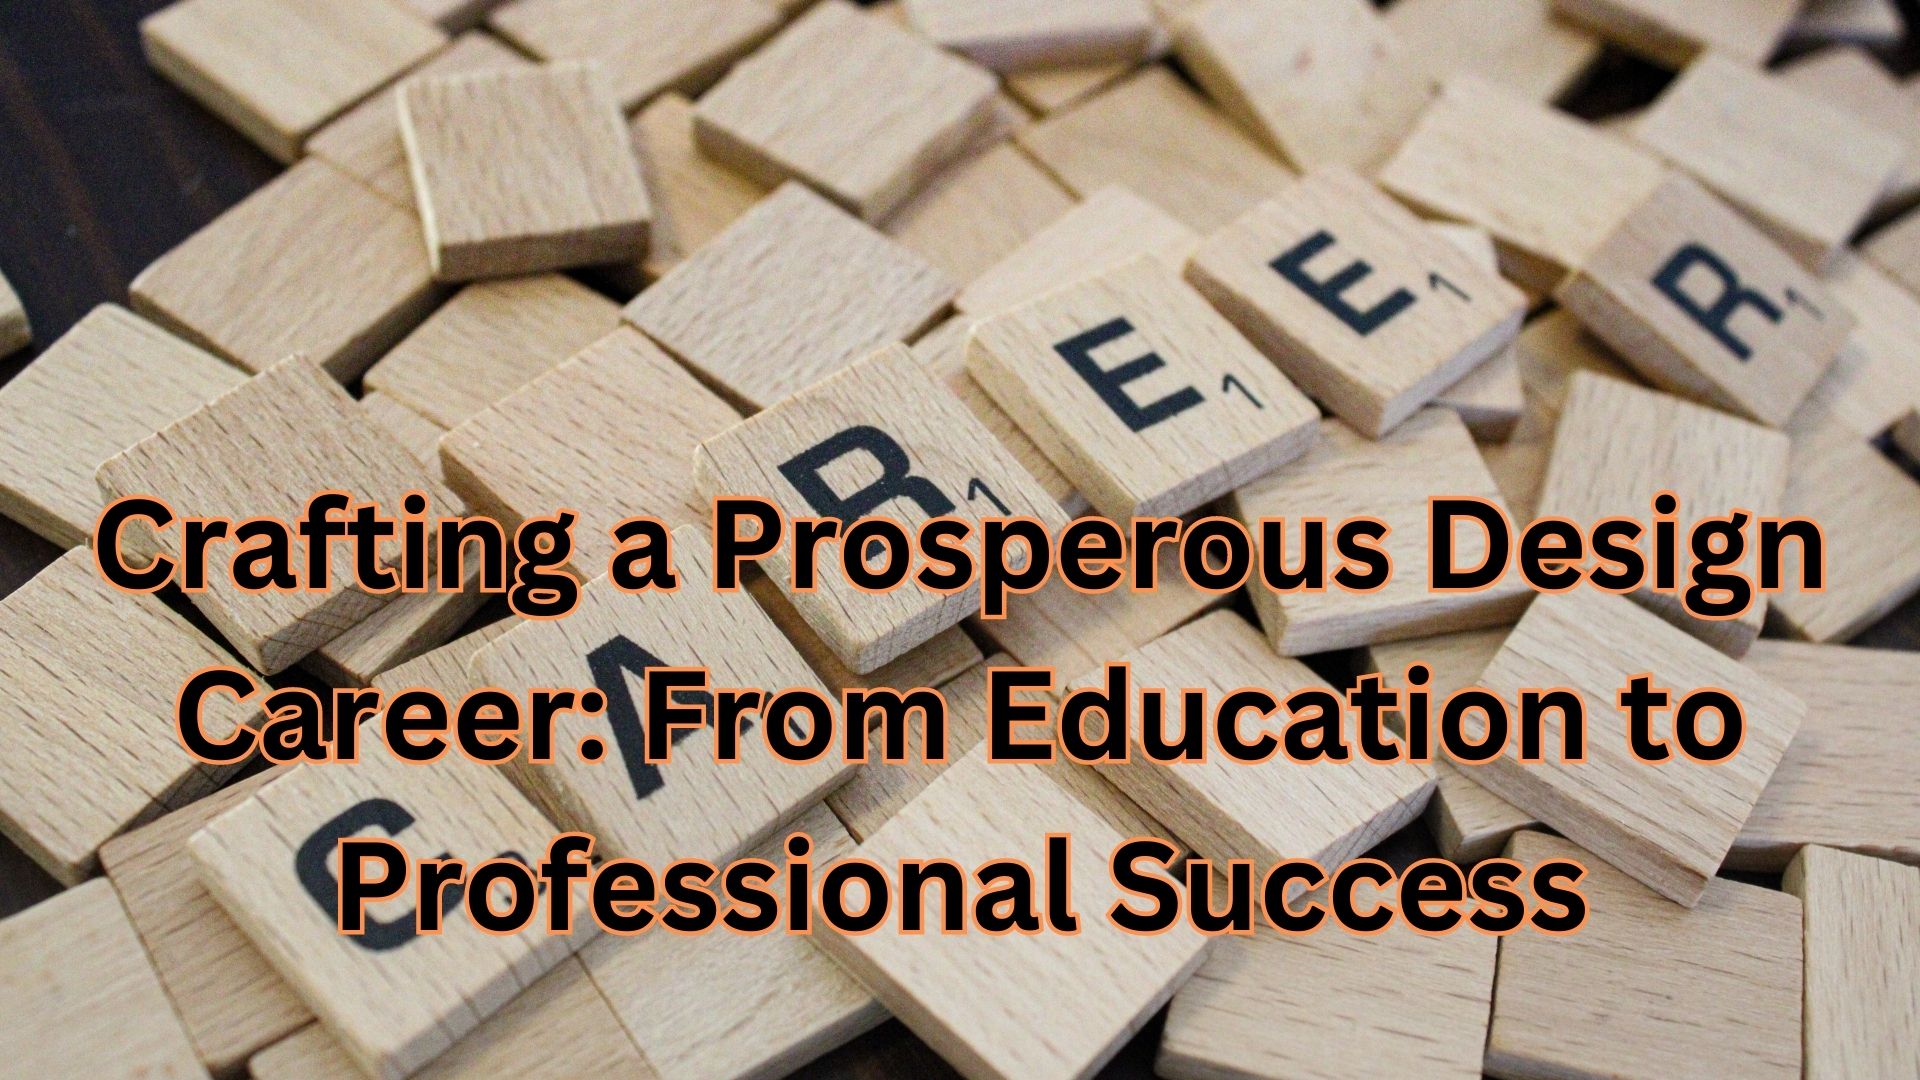 Crafting a Prosperous Design Career: From Education to Professional Success